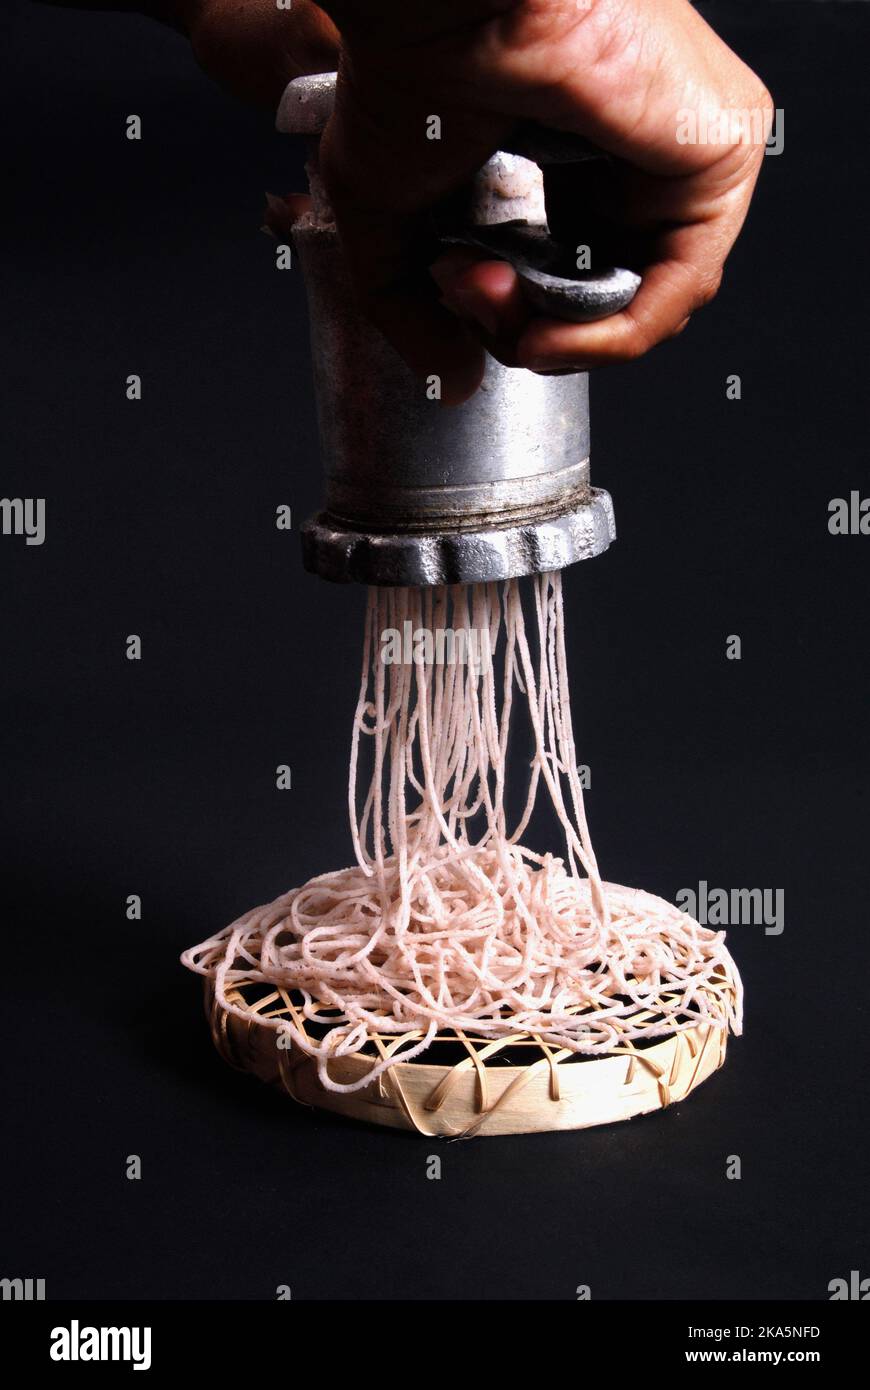 Home brew string hoppers. Lady making string hoppers using traditional equipment and flour. Lady hands and equipment in black background sri lanka. Stock Photo